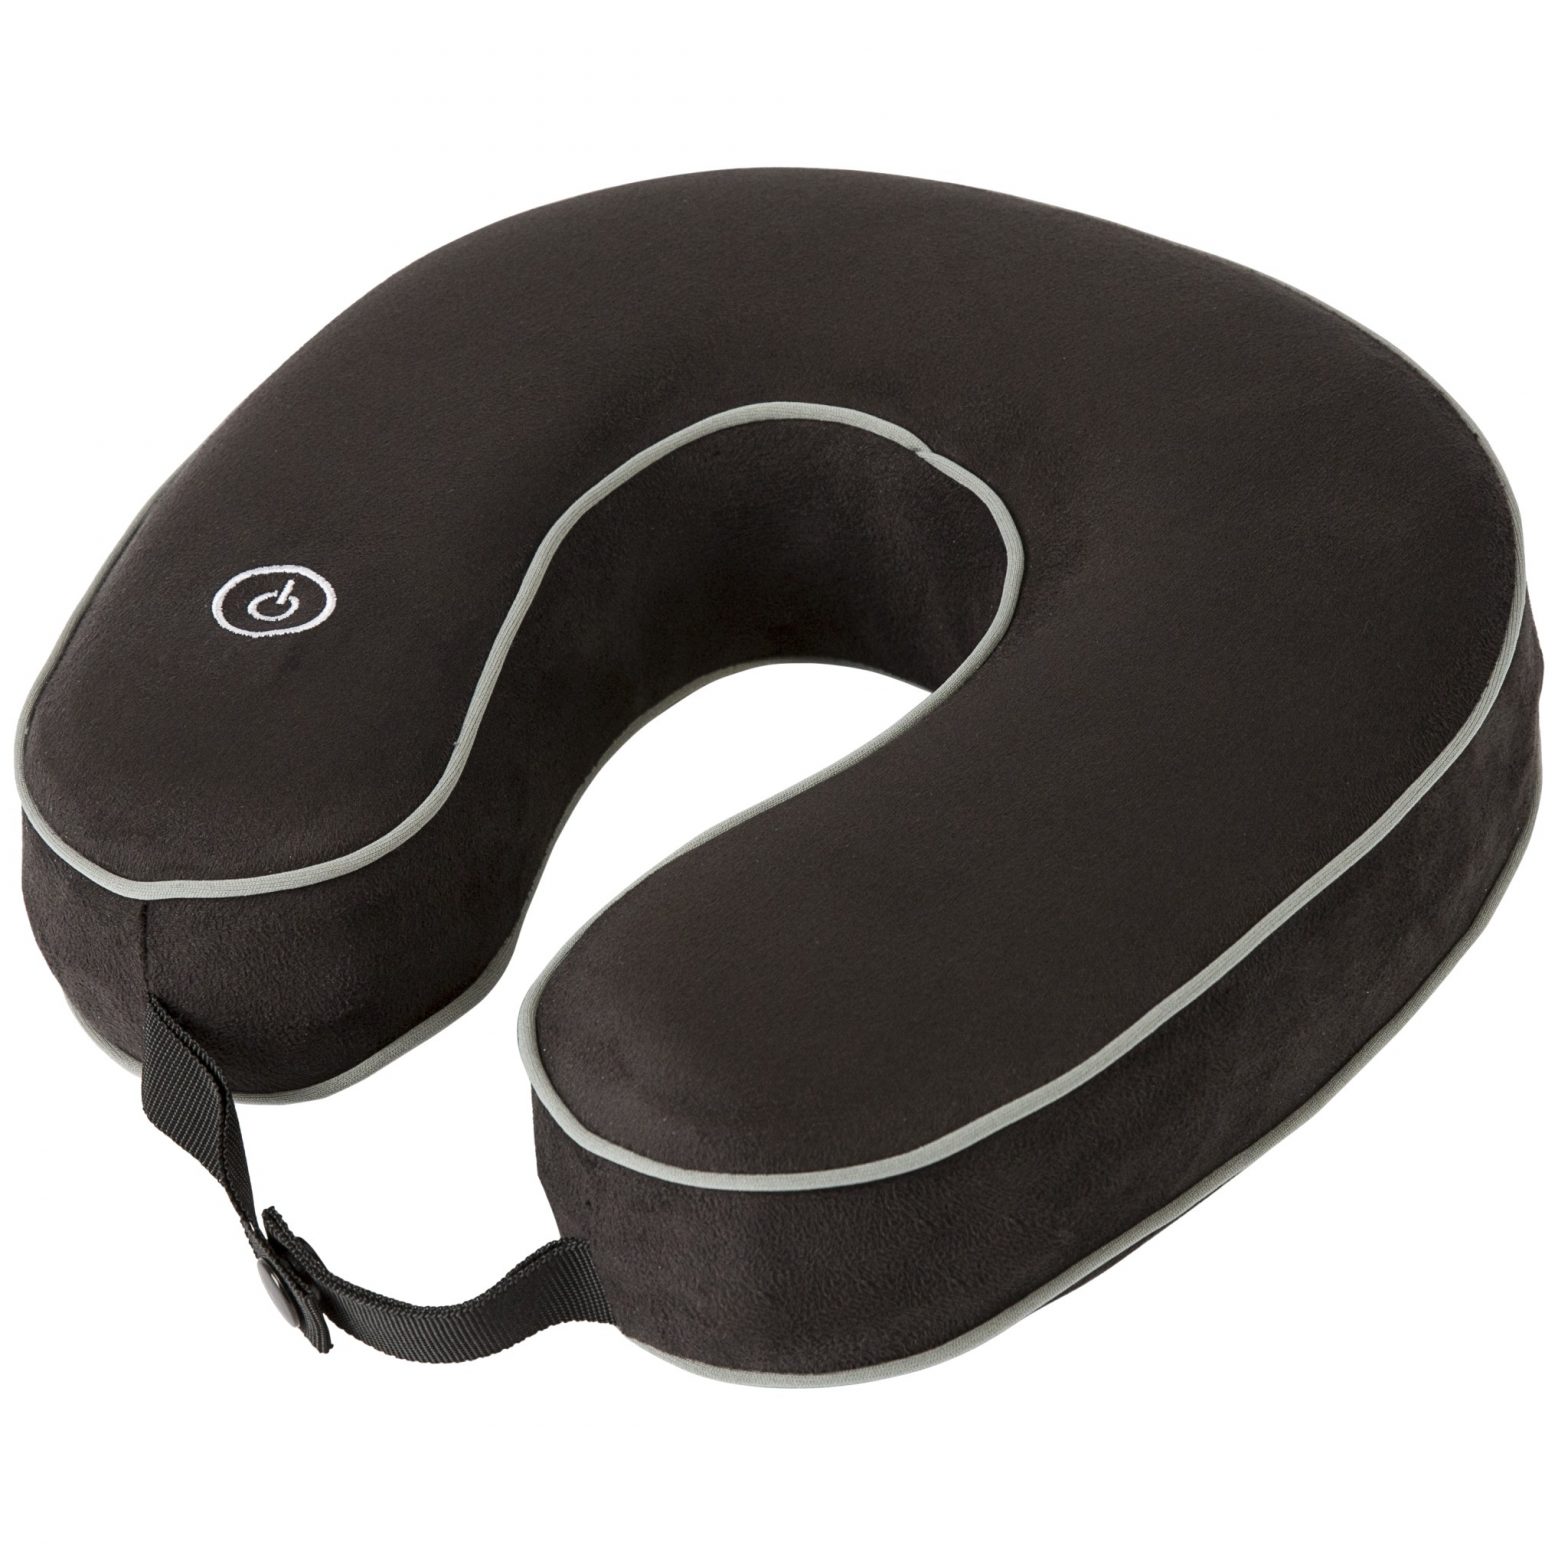 Homedics TA-NMSQ220 Memory Foam Neck Pillow and Vibration Massager Instruction Manual and Warranty Information